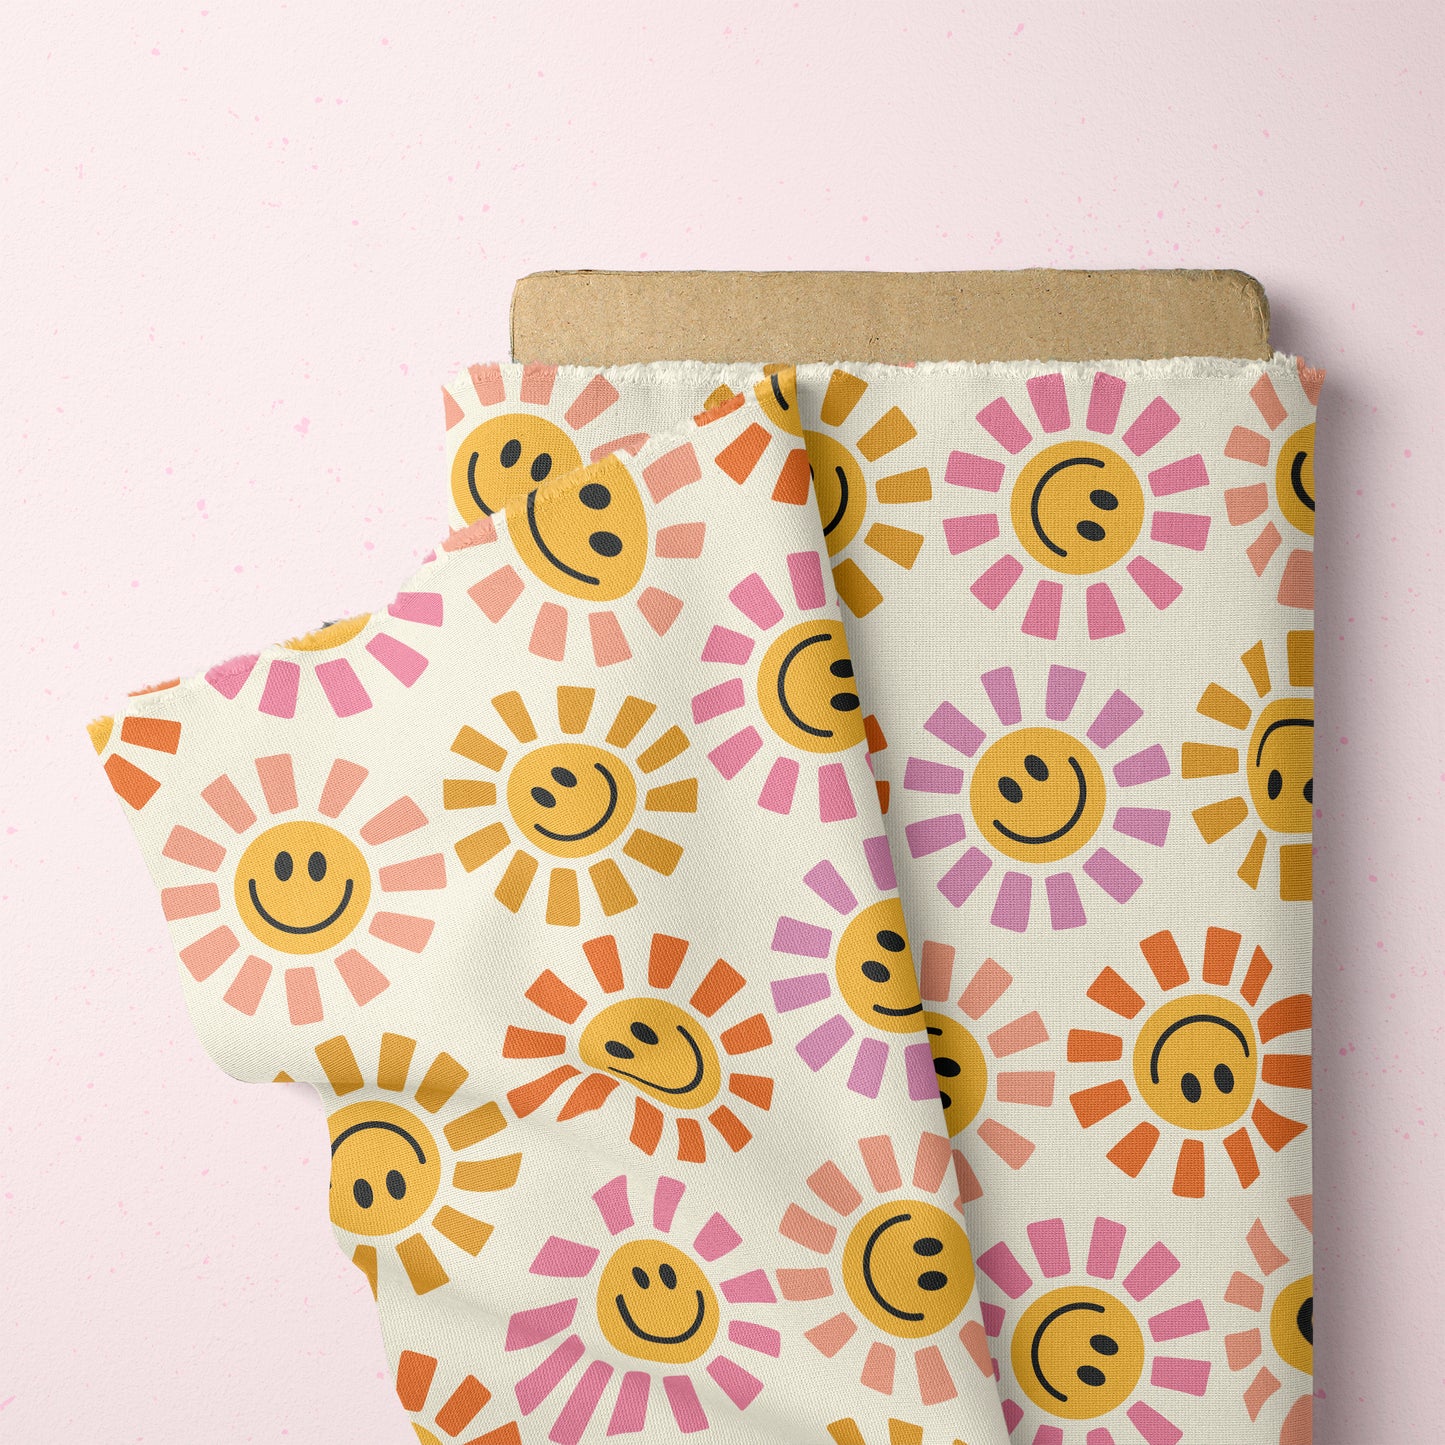 Smiles Sun Summer Seamless File for Fabric Sublimation